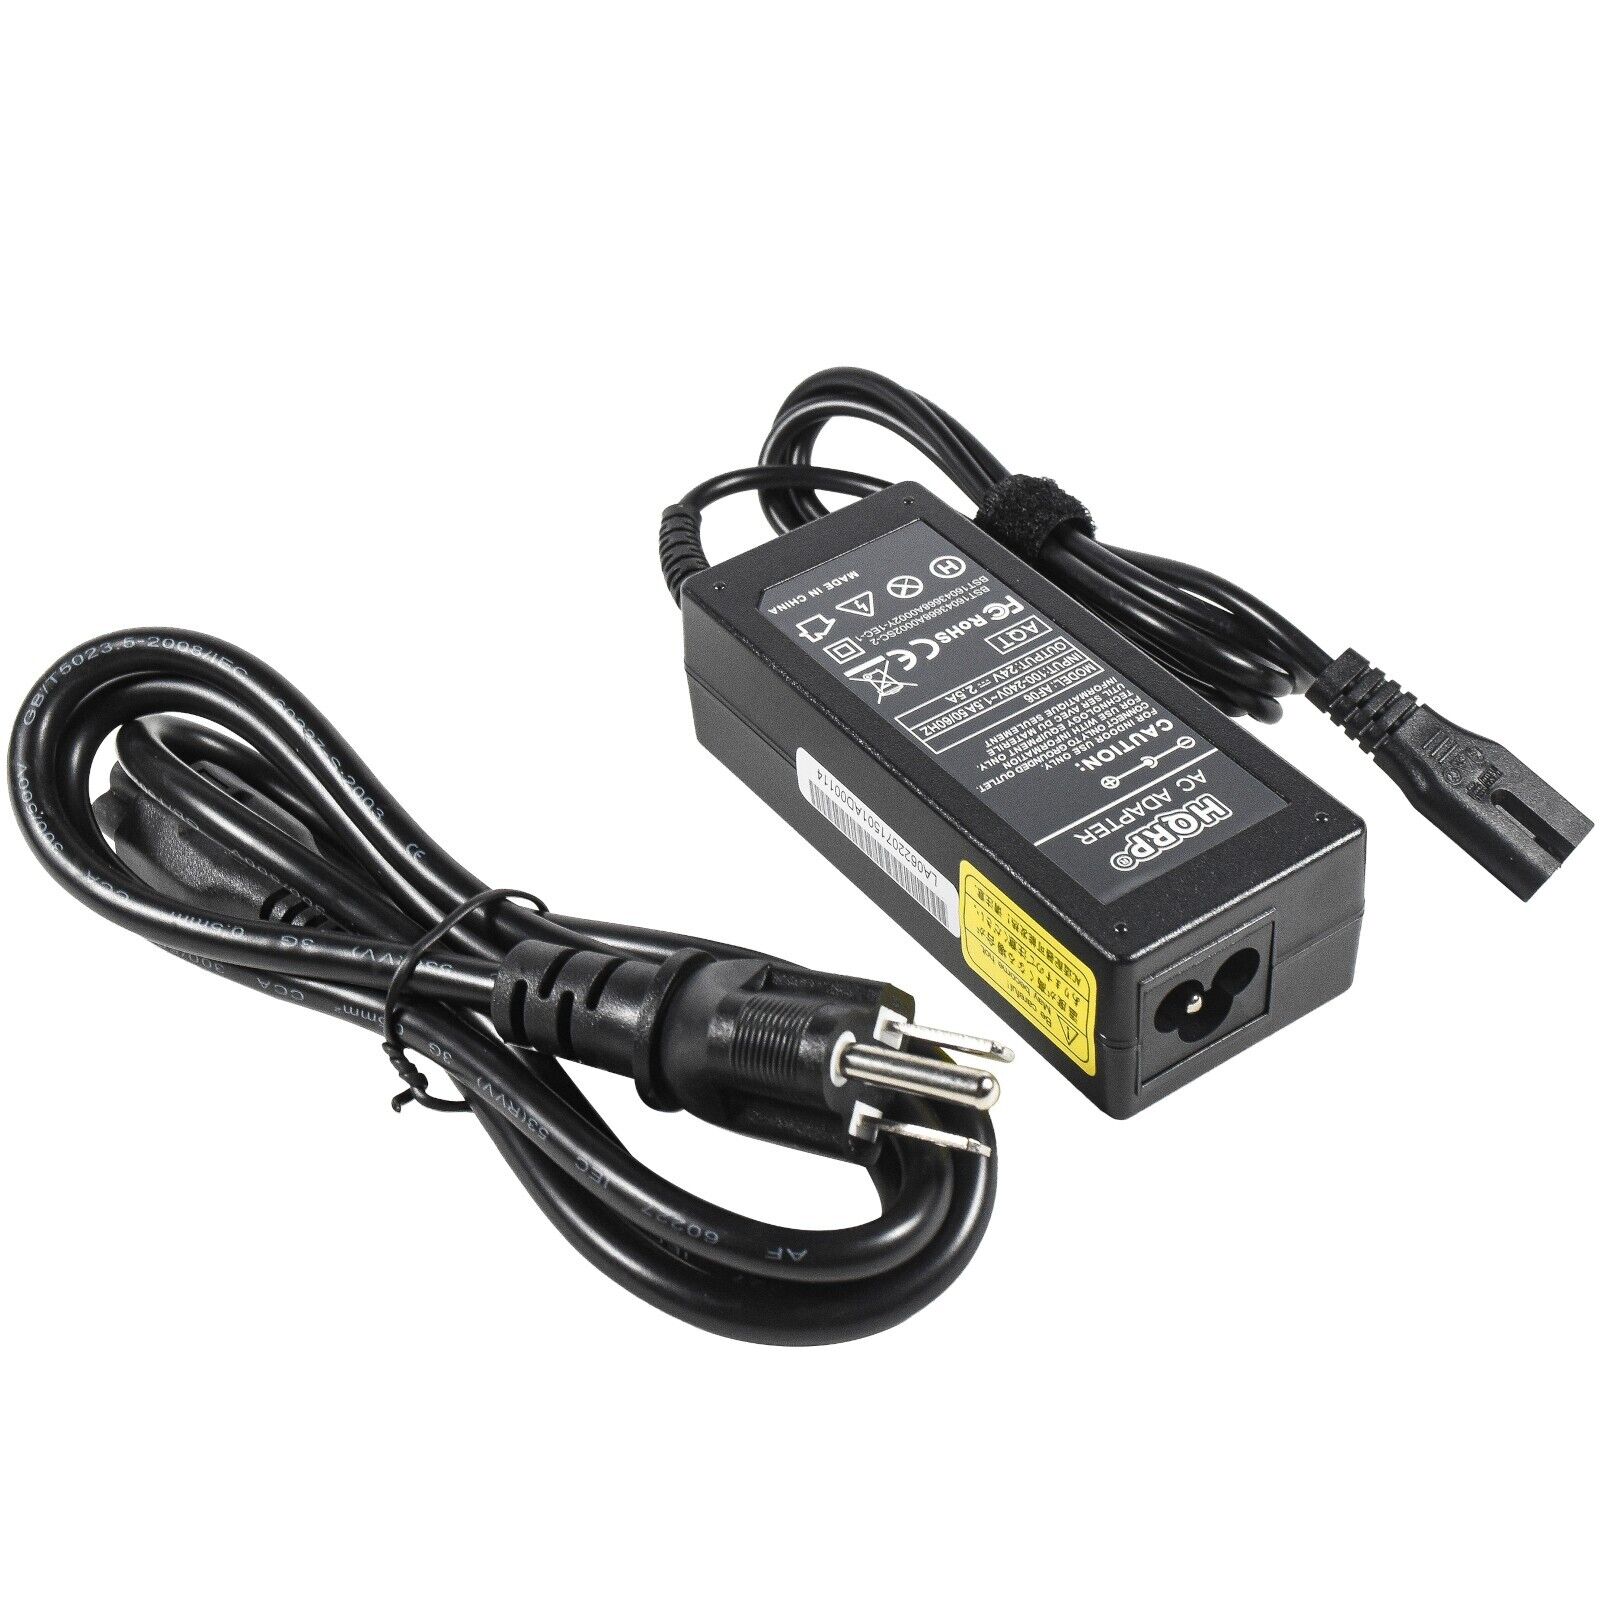 *Brand NEW* UComfy 8072 8954 9209 4A201201 YH-3318G Massagers DC 24V, 2.5A AC Adapter - Click Image to Close